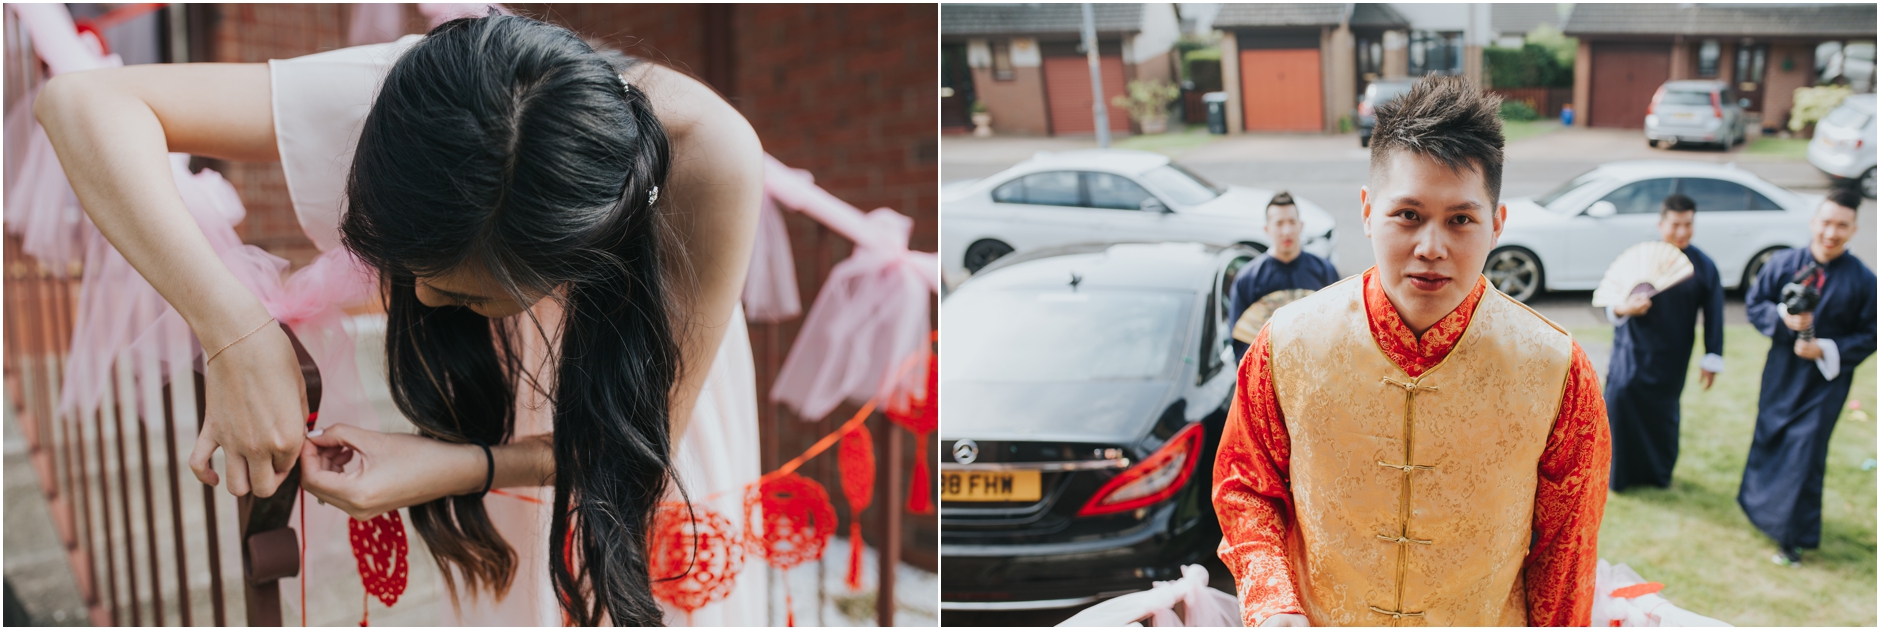 house for an art lover see woo chinese creative glasgow wedding photographer